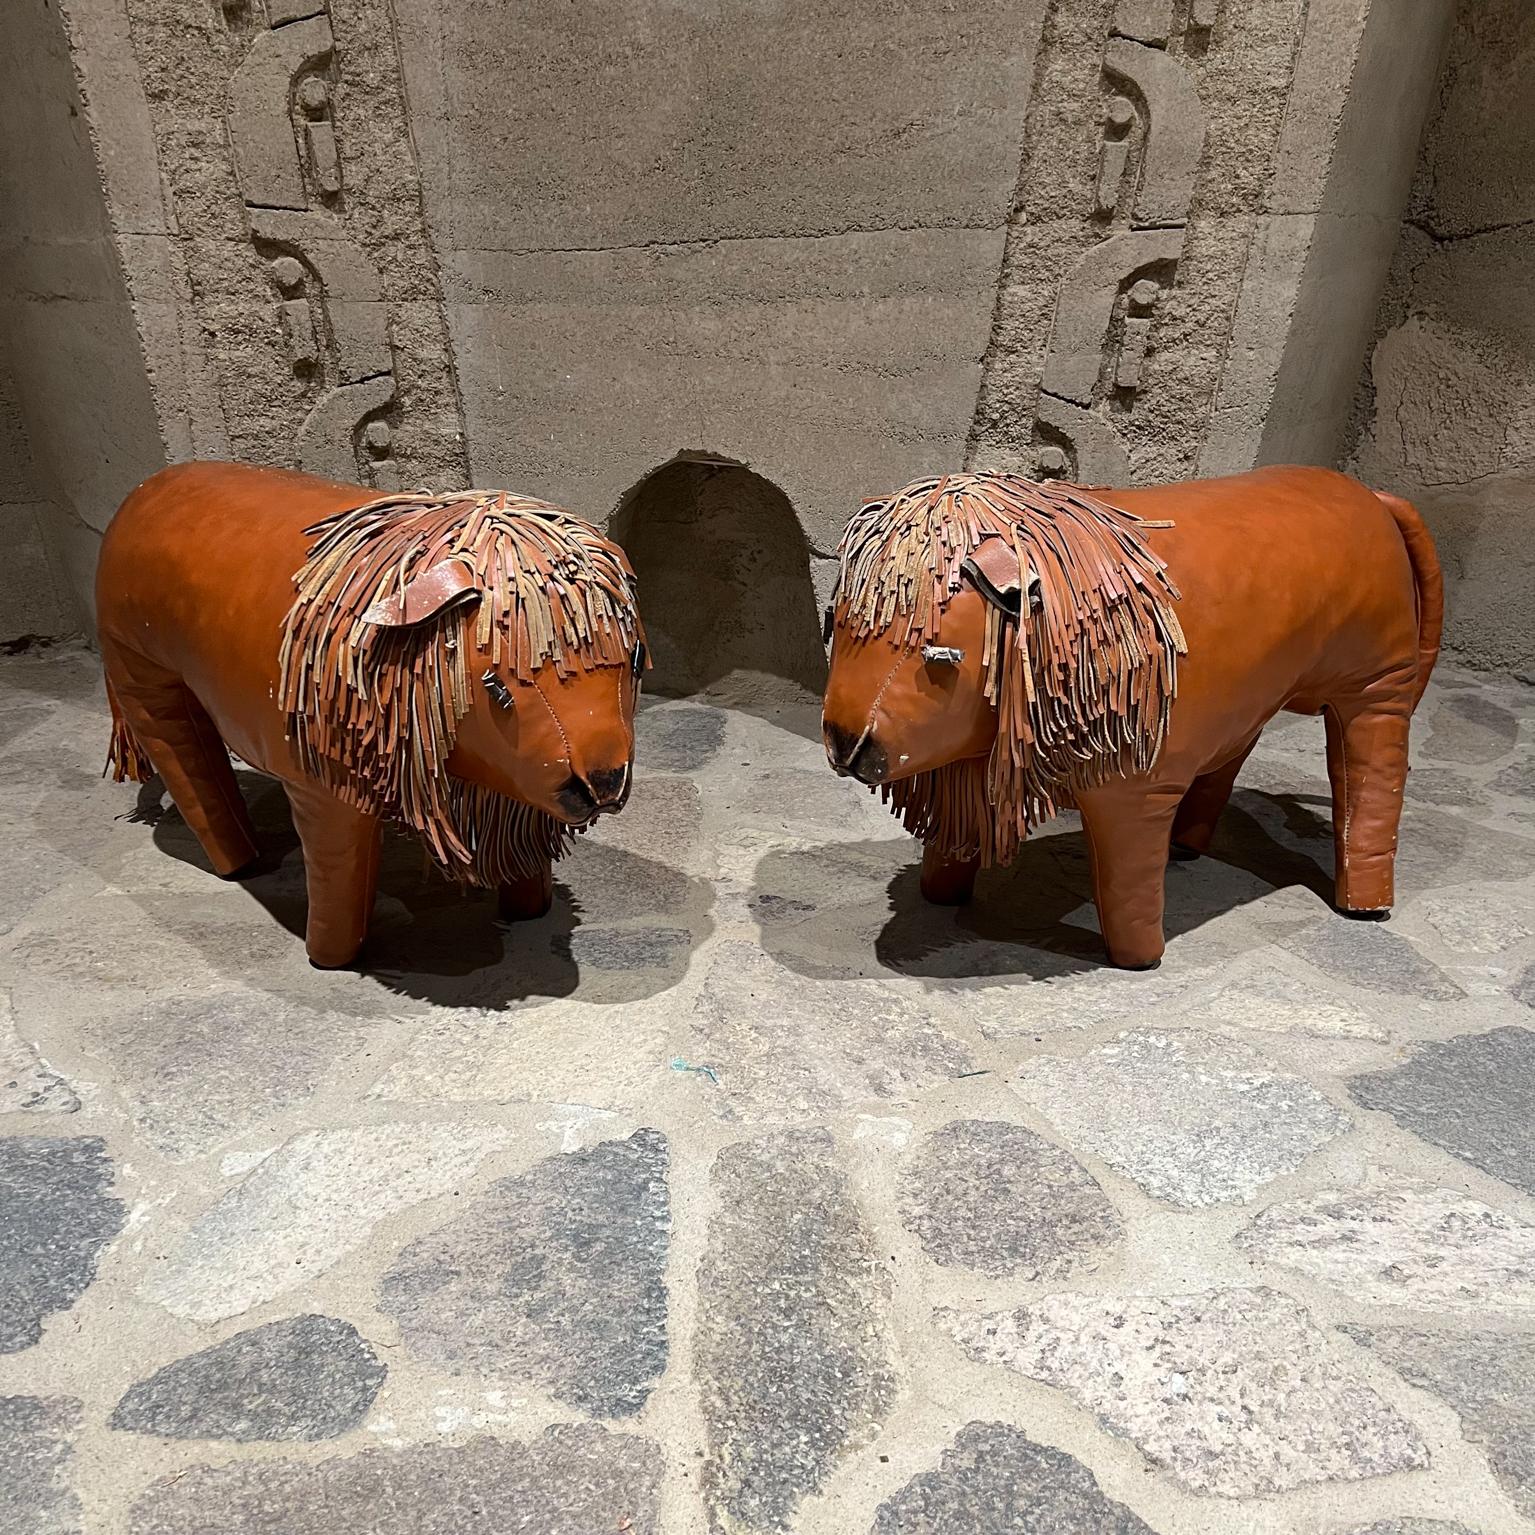 Two Foot stools
Pair of Leather Lion Foot Stools 
In the style of Dimitri Omersa for Abercrombie & Fitch.
No label present 
17 h x 27 long x 10.5 w
Preowned original vintage good condition. 
Tail has a prior repair.
See images provided.
Delivery to